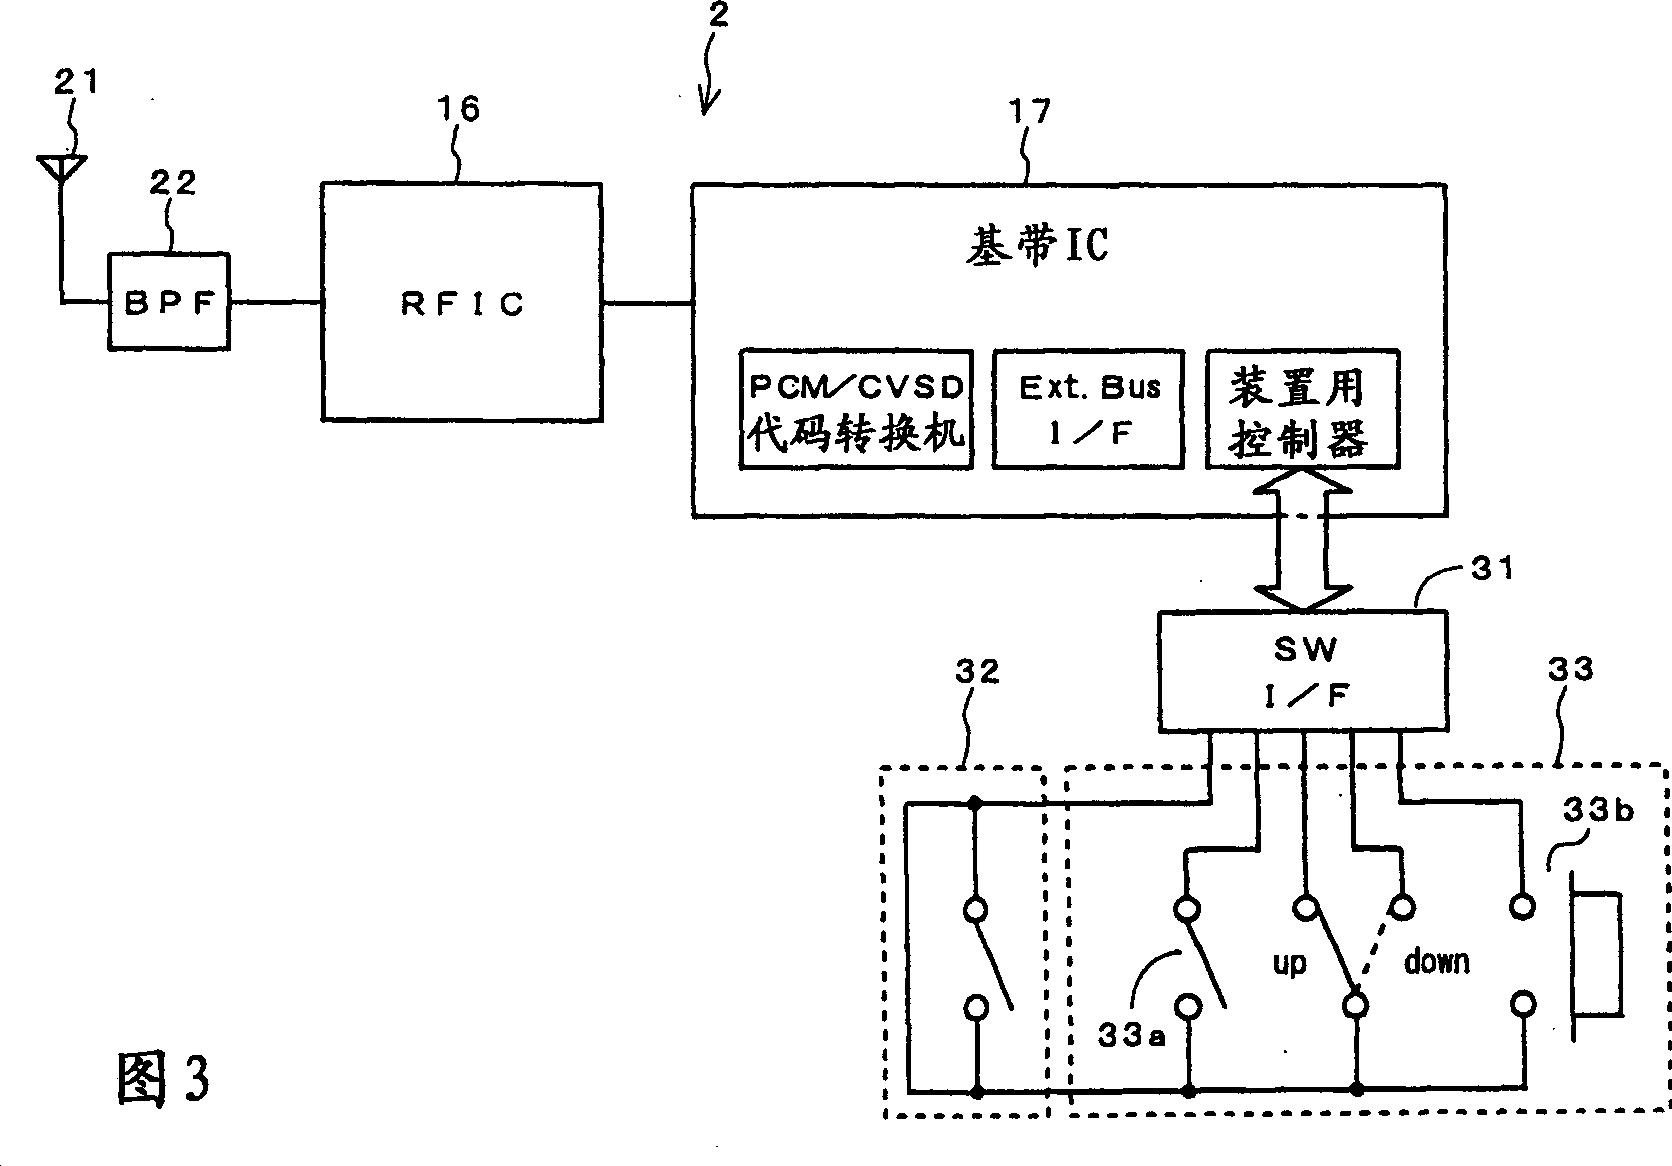 Communication system having group accession function